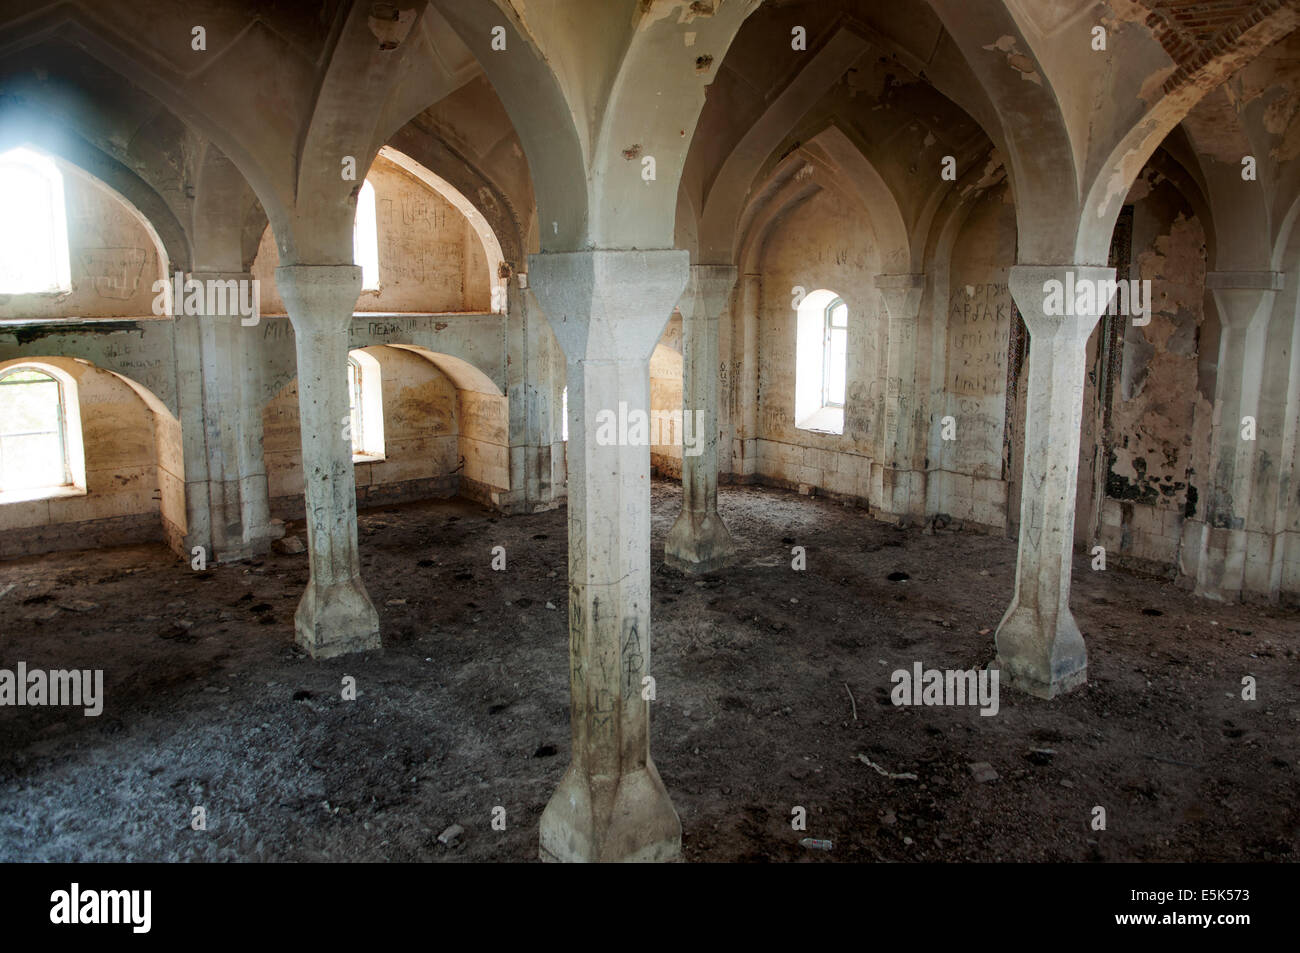 Abandoned ancient Persian Mosque, Agdam ghost town, unrecognized state of Nagorno-Karabakh Stock Photo